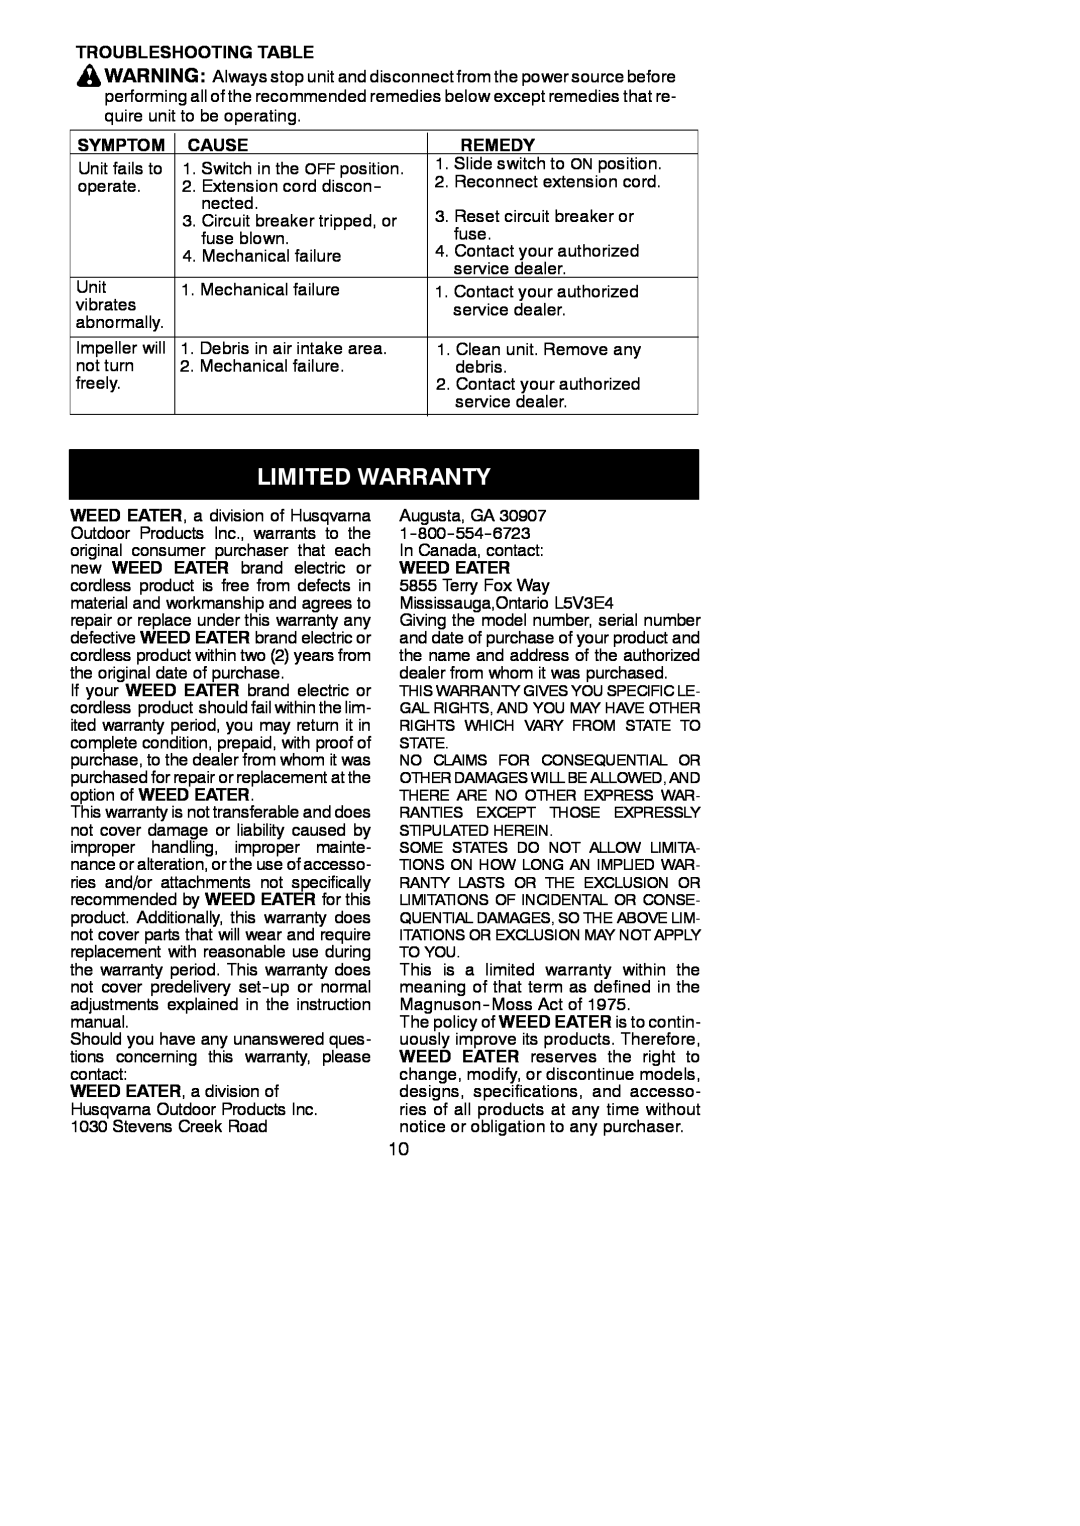 Weed Eater 545186750 instruction manual Limited Warranty, Troubleshooting Table, Symptom, Cause, Remedy, Weed Eater 